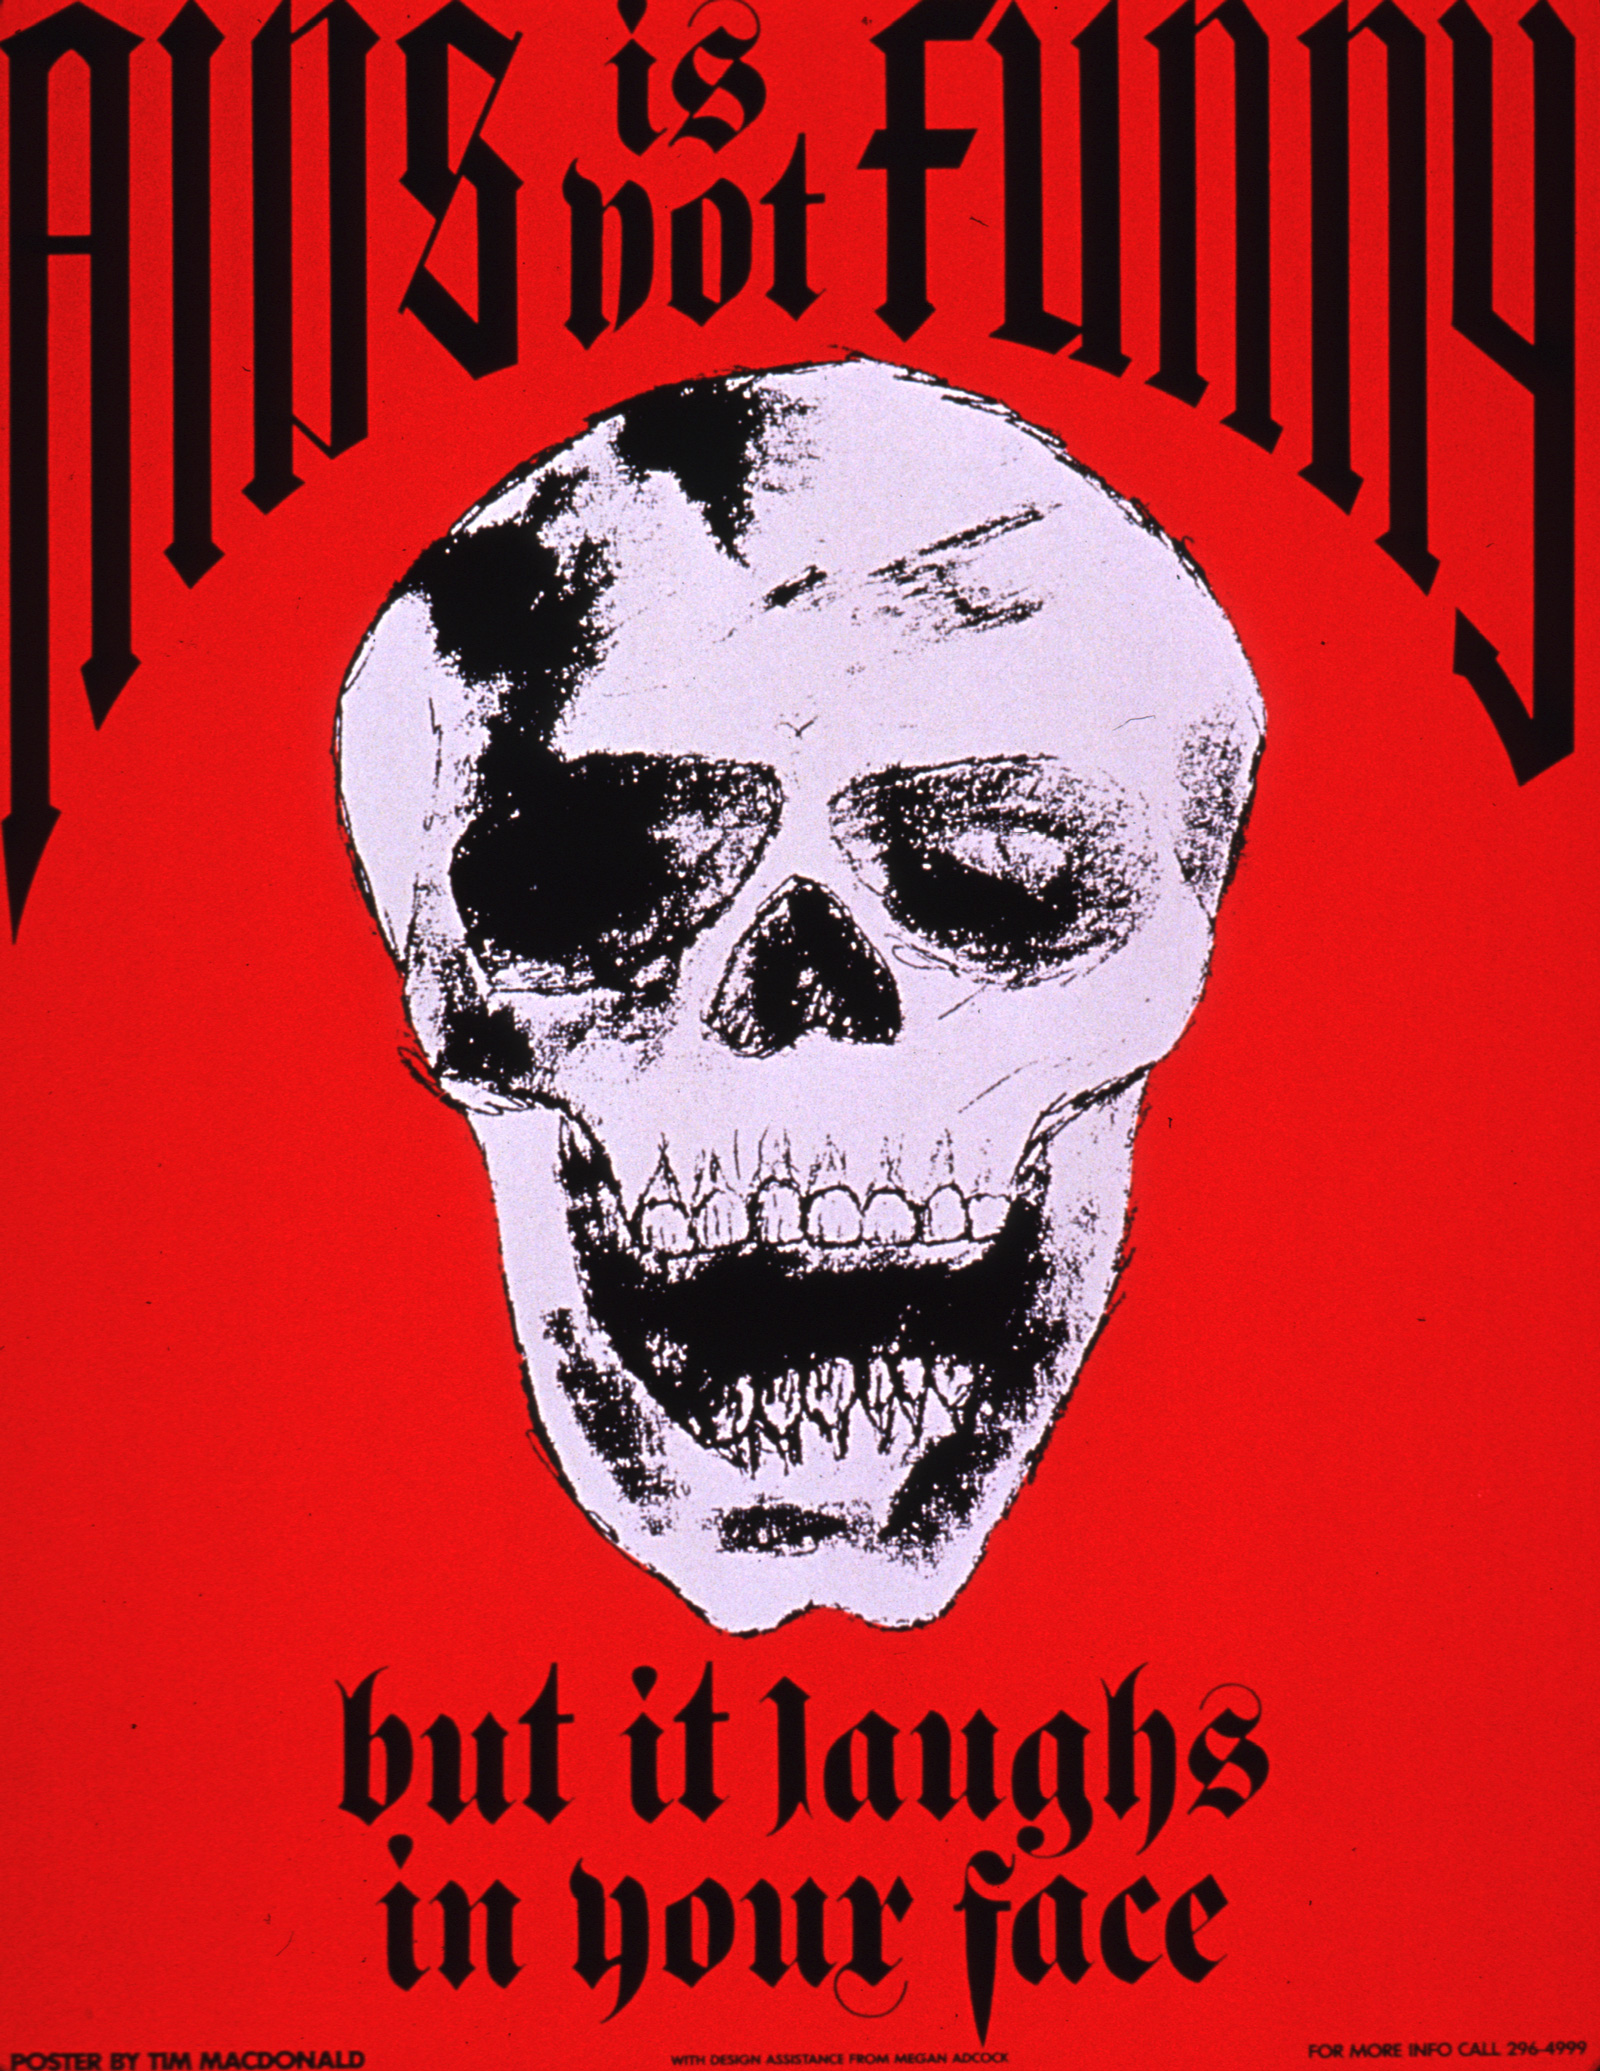 Drawing of a skull with its mouth open on a red background with the title “AIDS is not funny…but it laughs in your face”